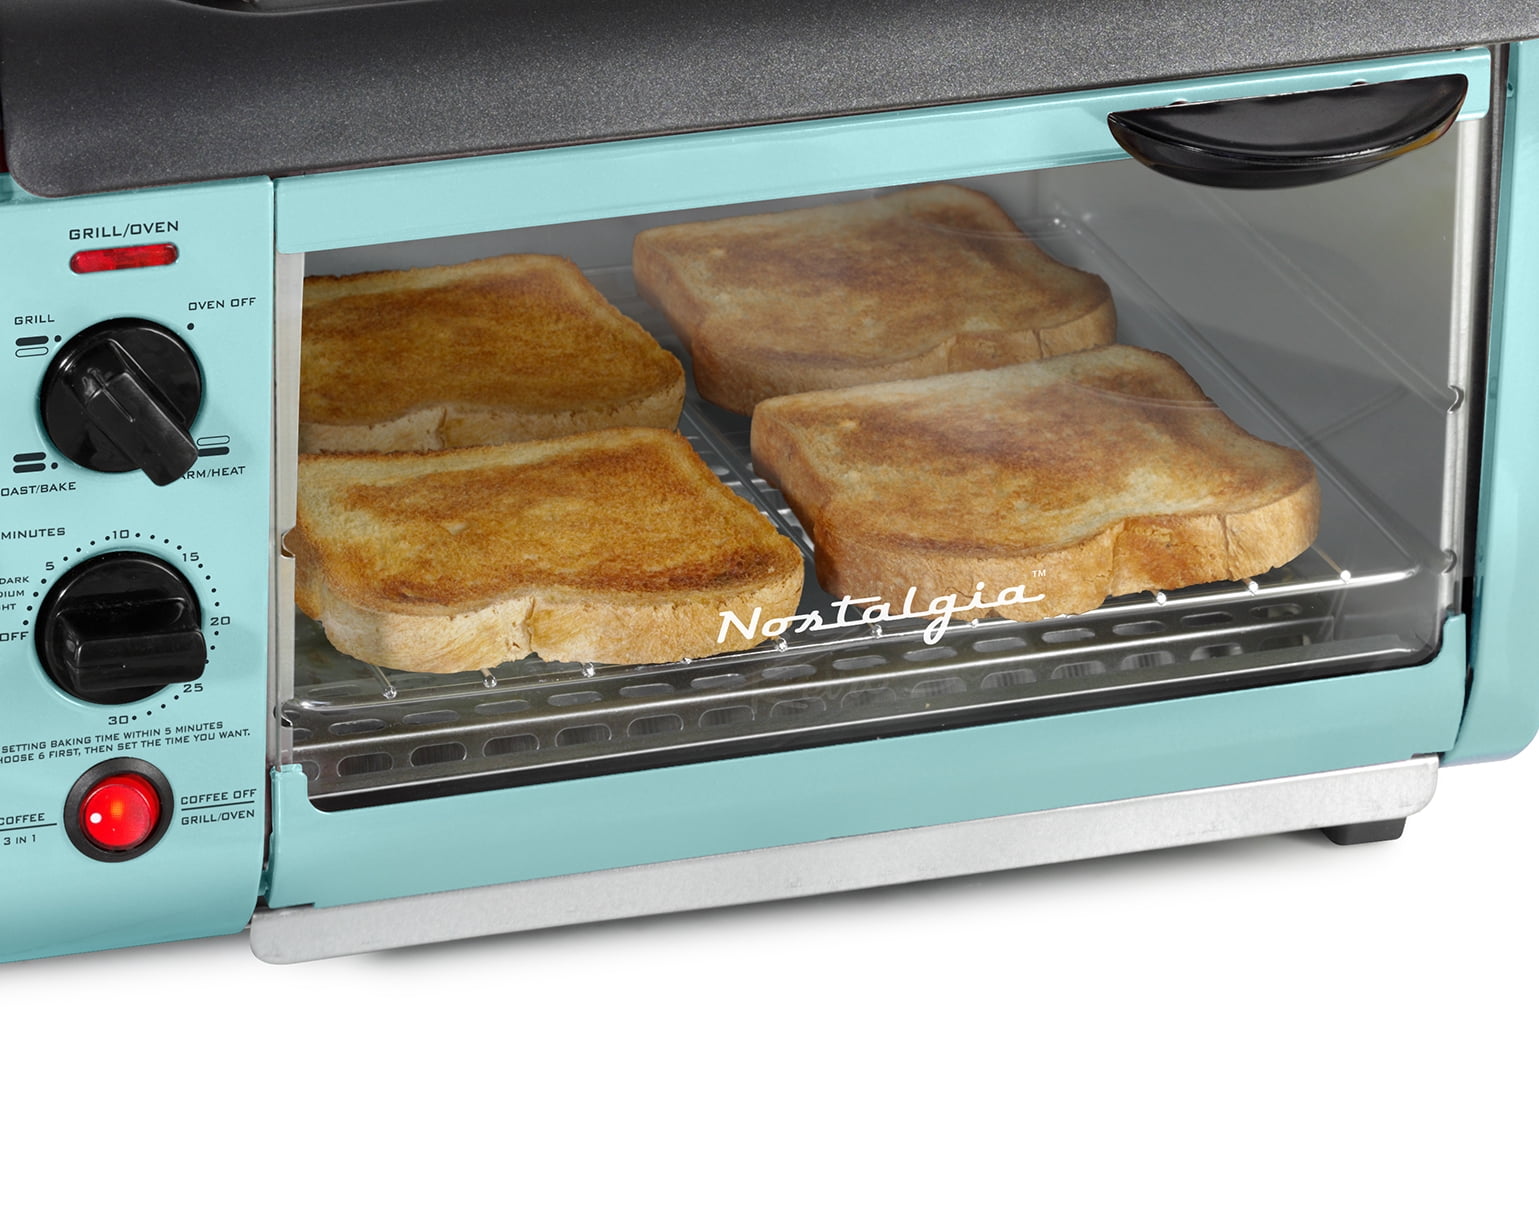 Toaster Oven 4 Cup Coffee Maker Griddle Combo Space Saving Retro Design Aqua